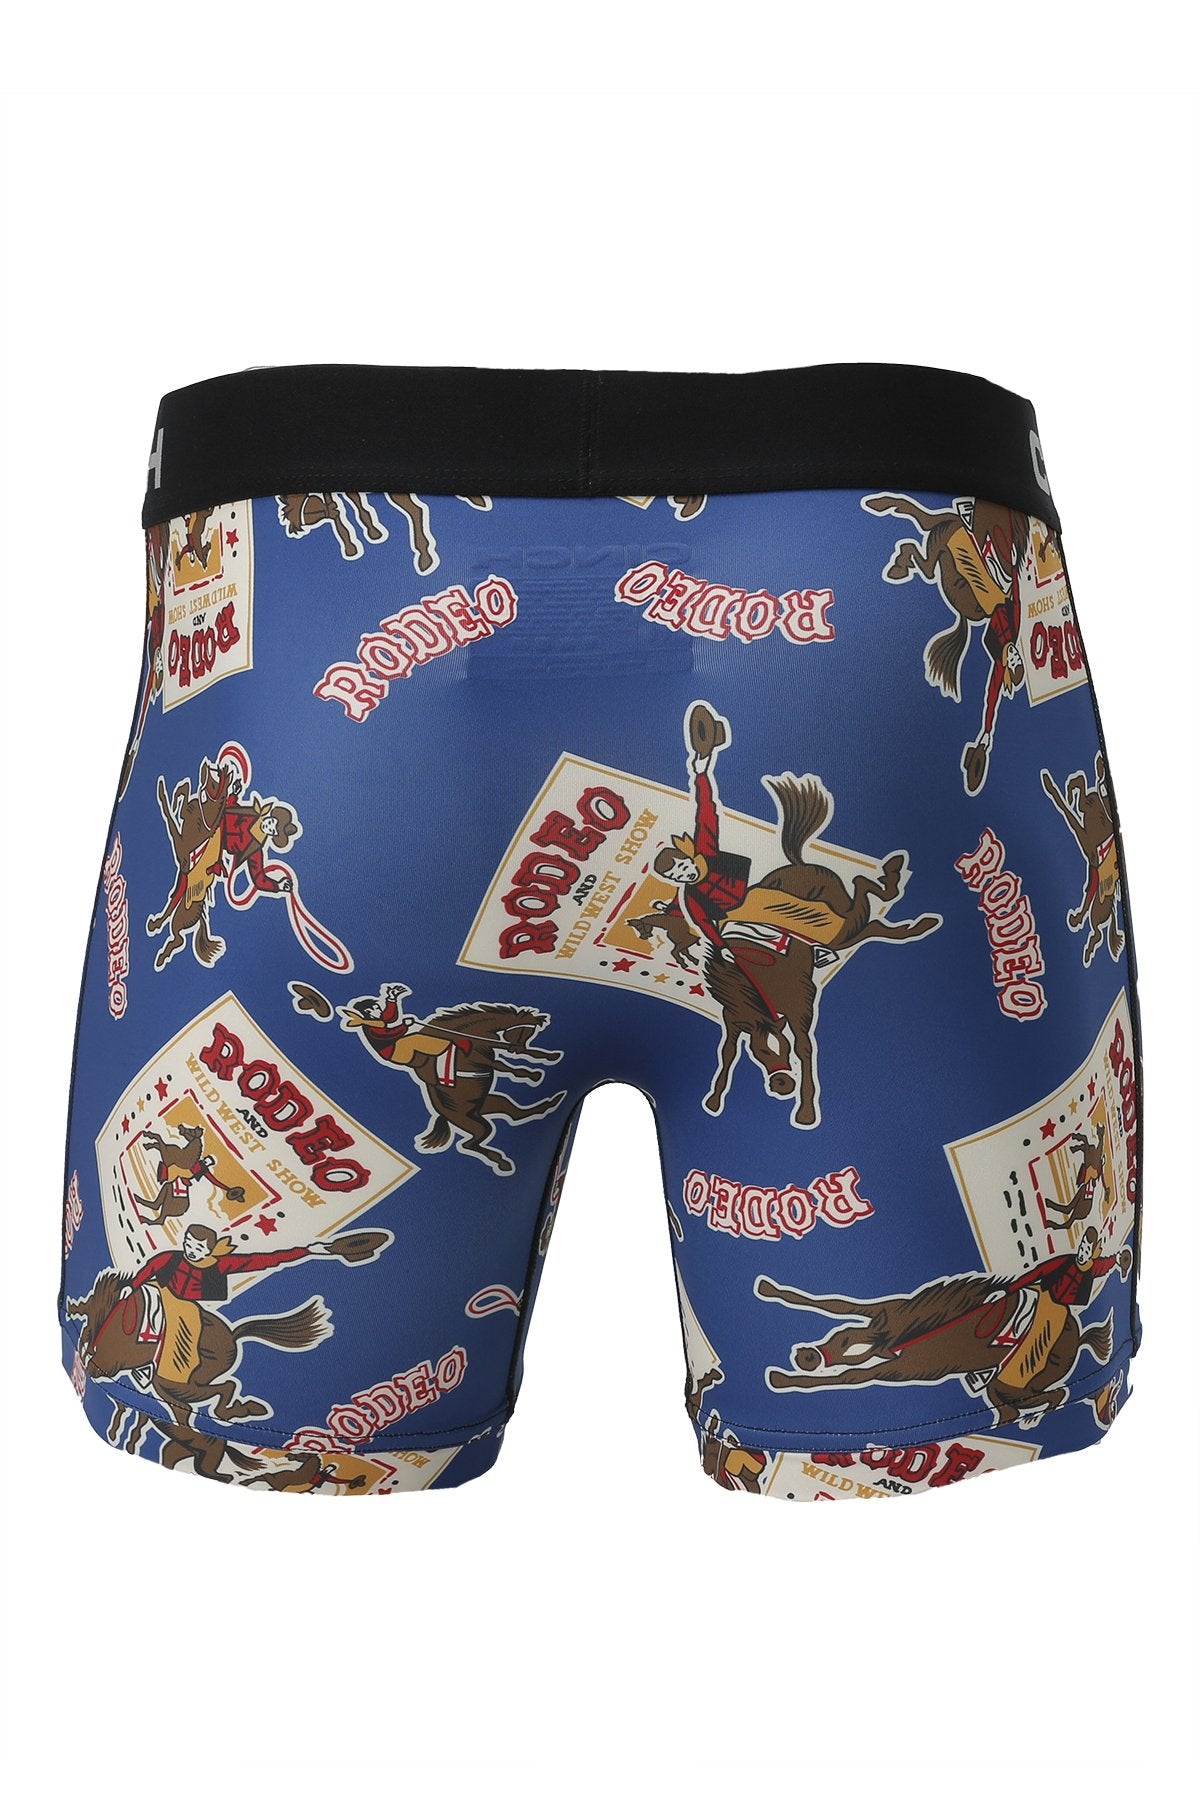 Cinch Mens Navy with Rodeo Print 6" Boxer Briefs